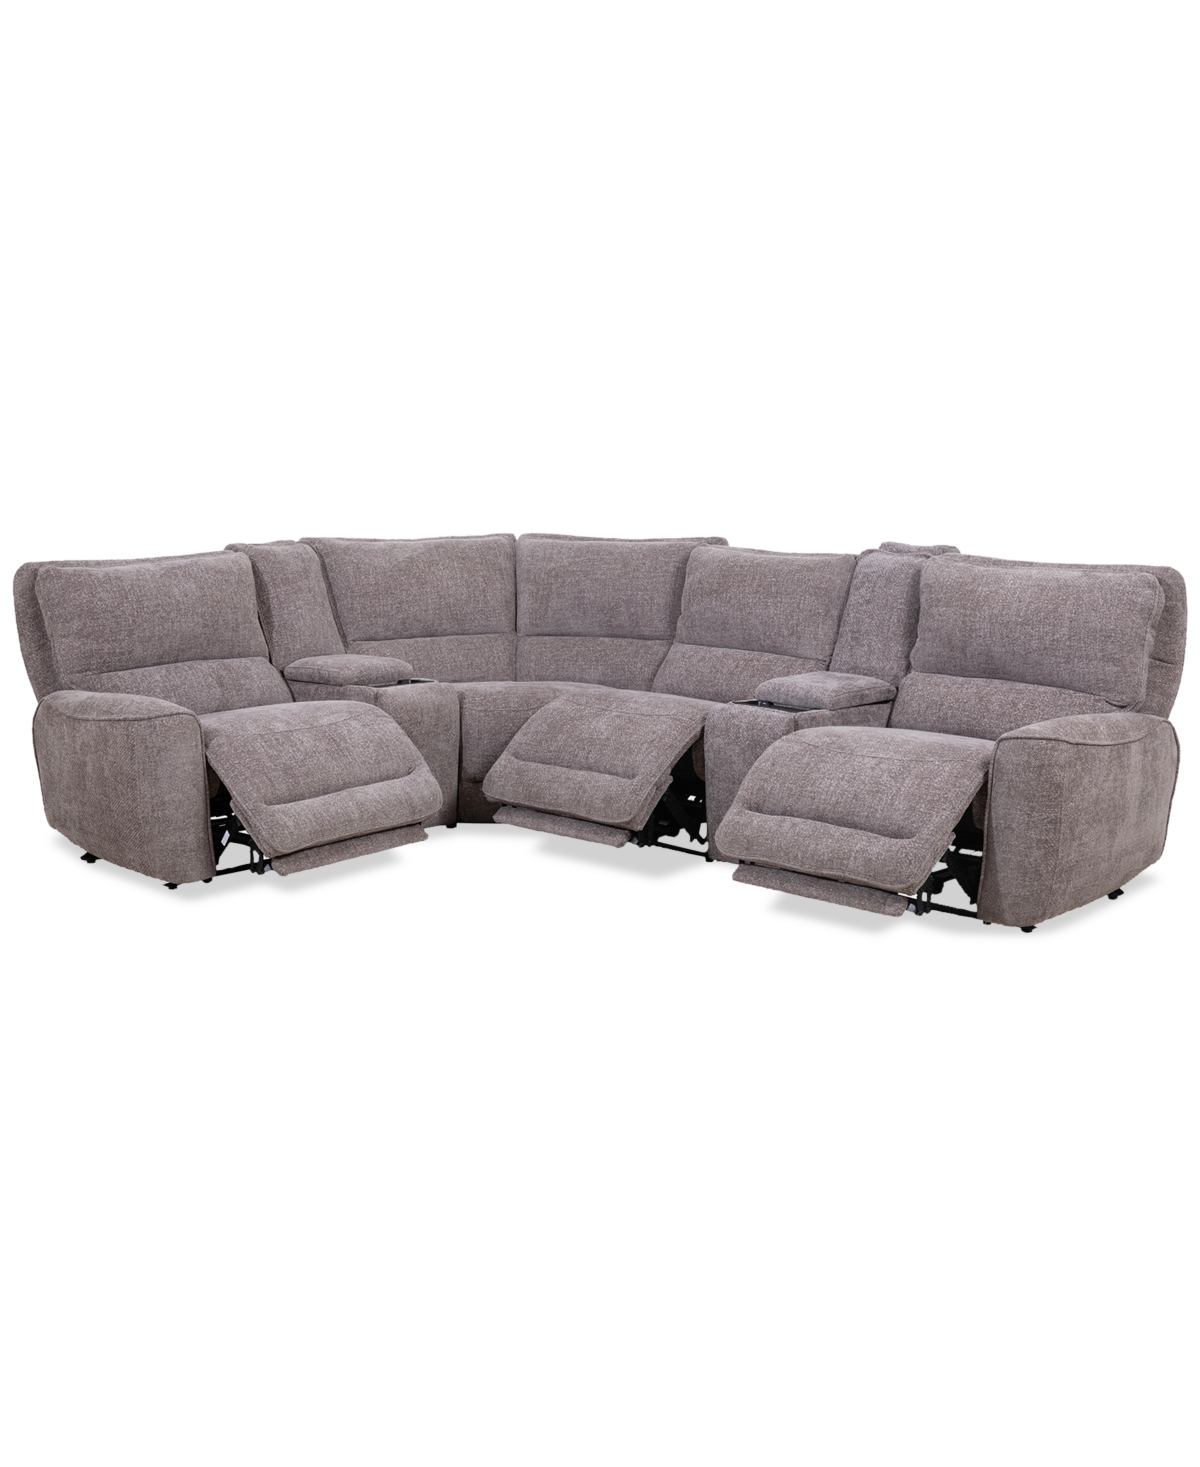 Macy's Deklyn 129" 6-pc. Zero Gravity Fabric Sectional With 3 Power Recliners & 2 Consoles, Created For Mac In Brown